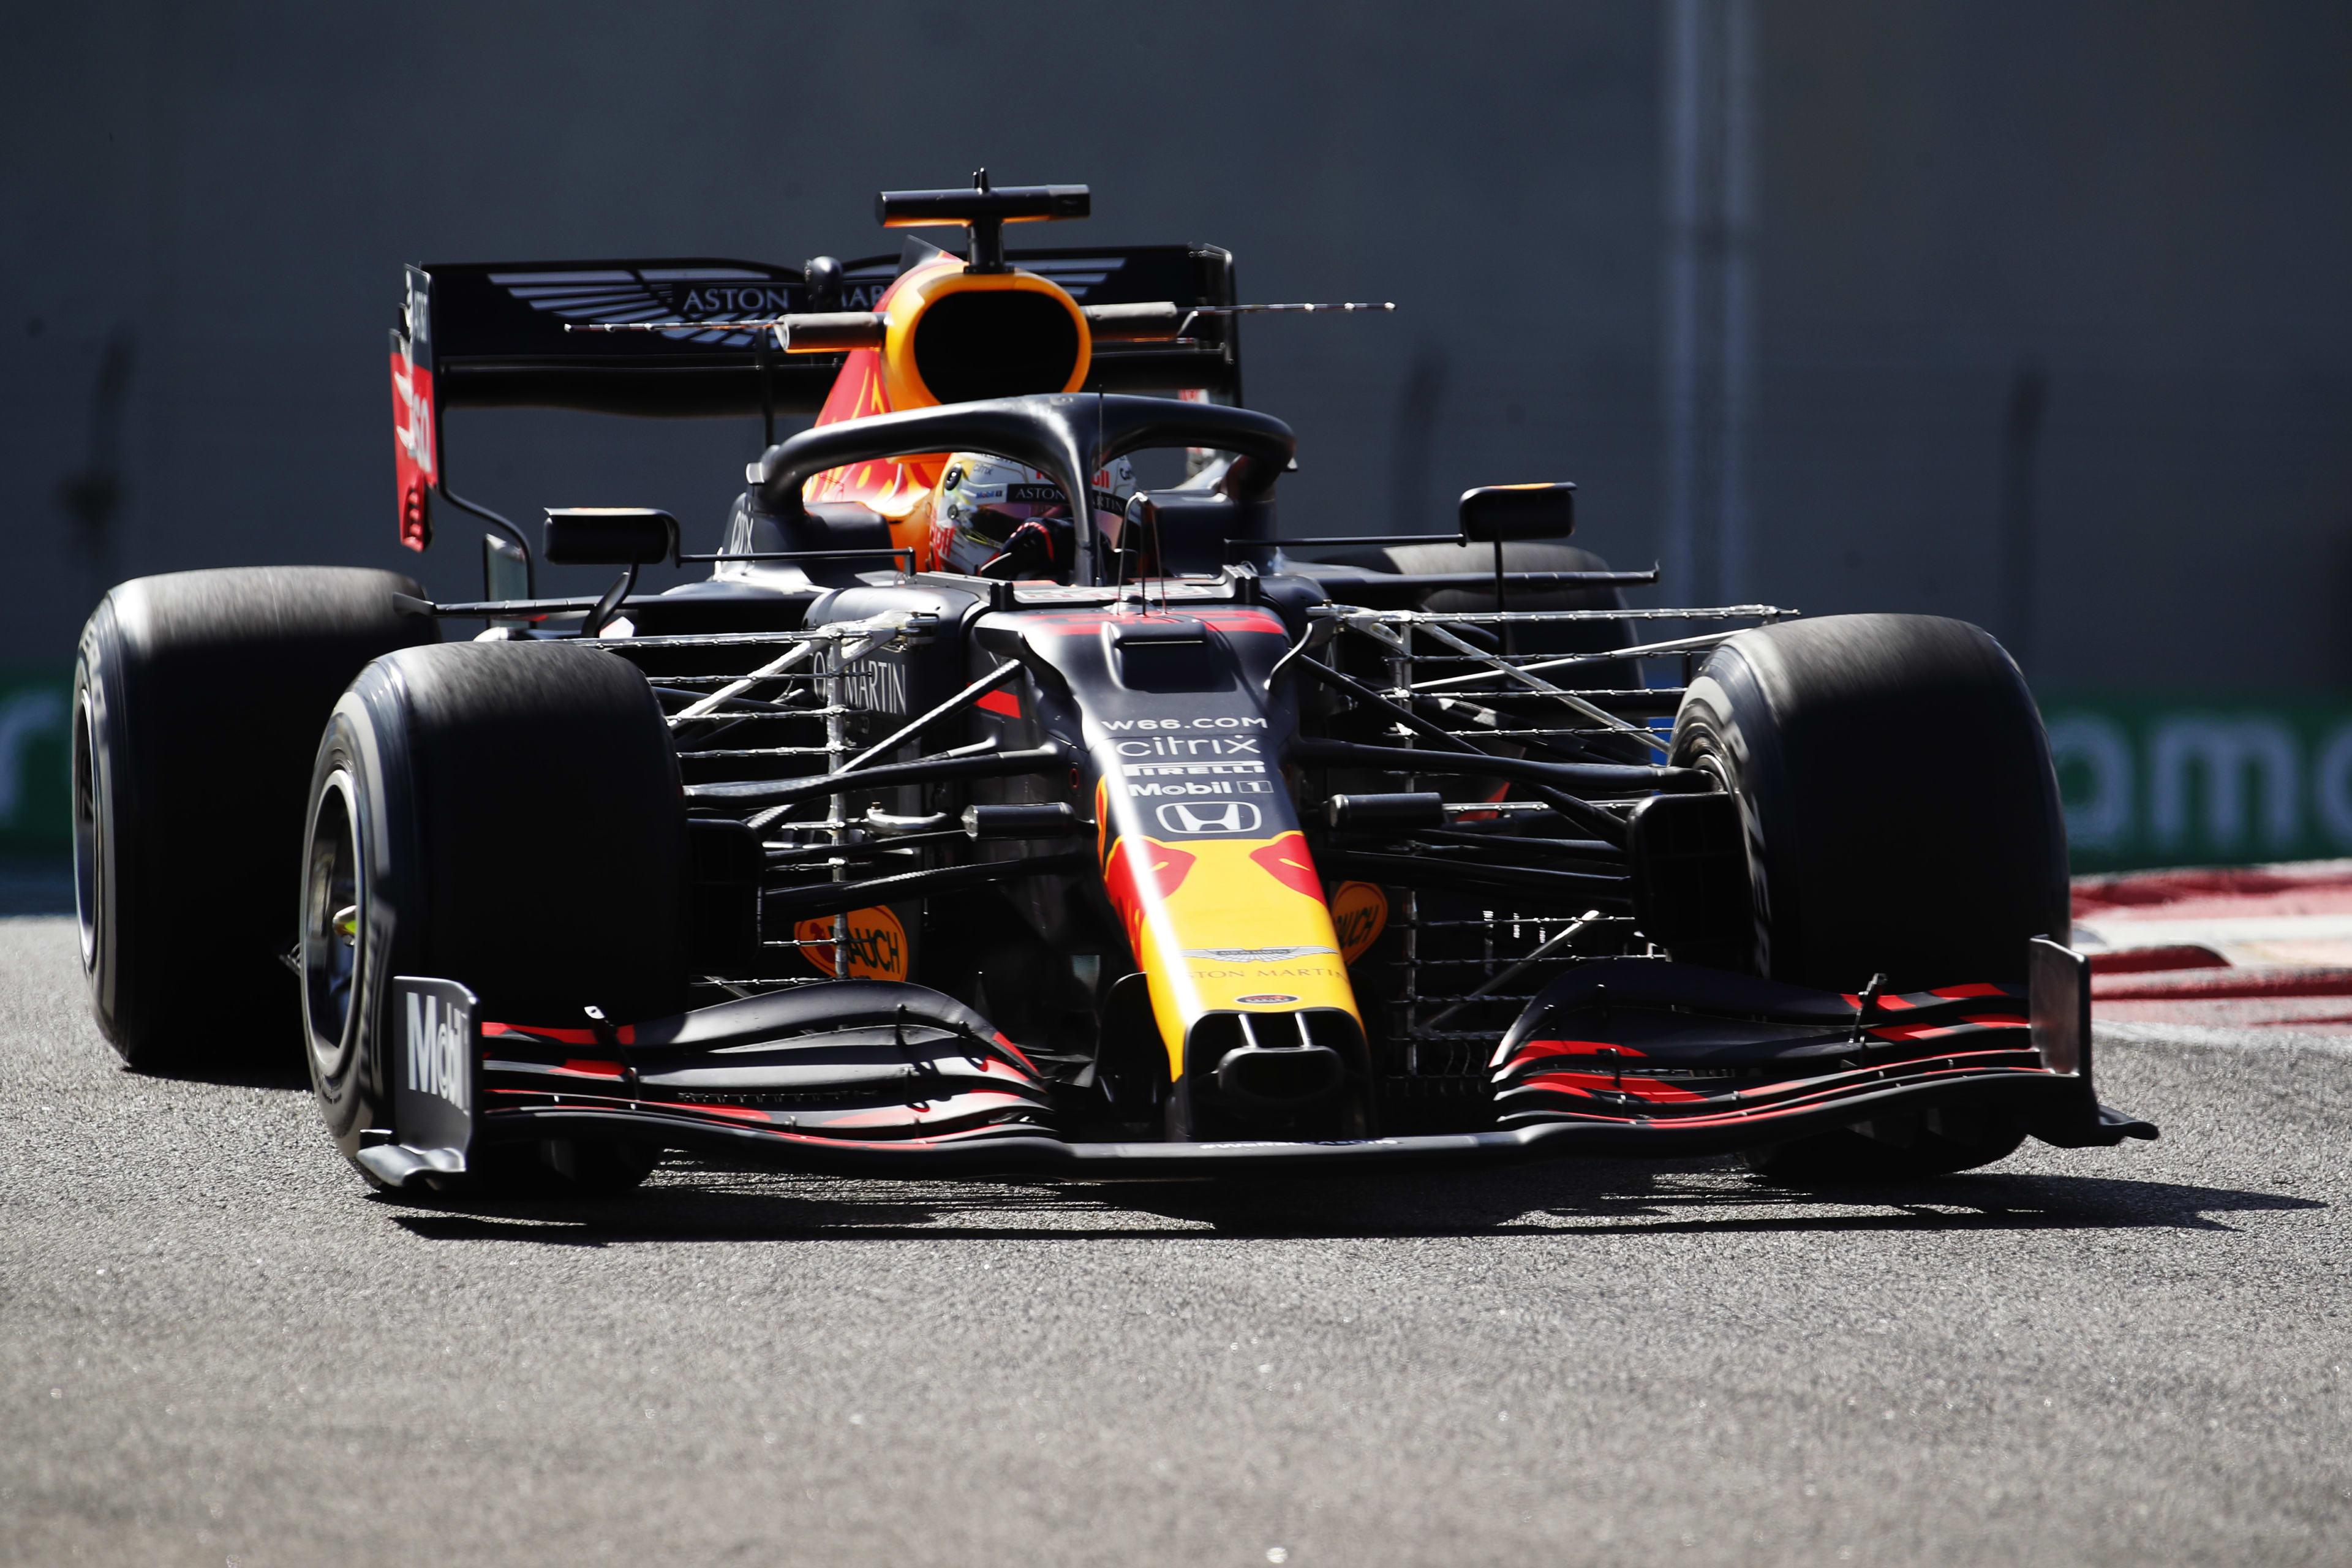 2020 Abu Dhabi Grand Prix FP1 report and highlights Verstappen quickest in first practice in Abu Dhabi with Hamilton fifth on F1 return Formula 1®